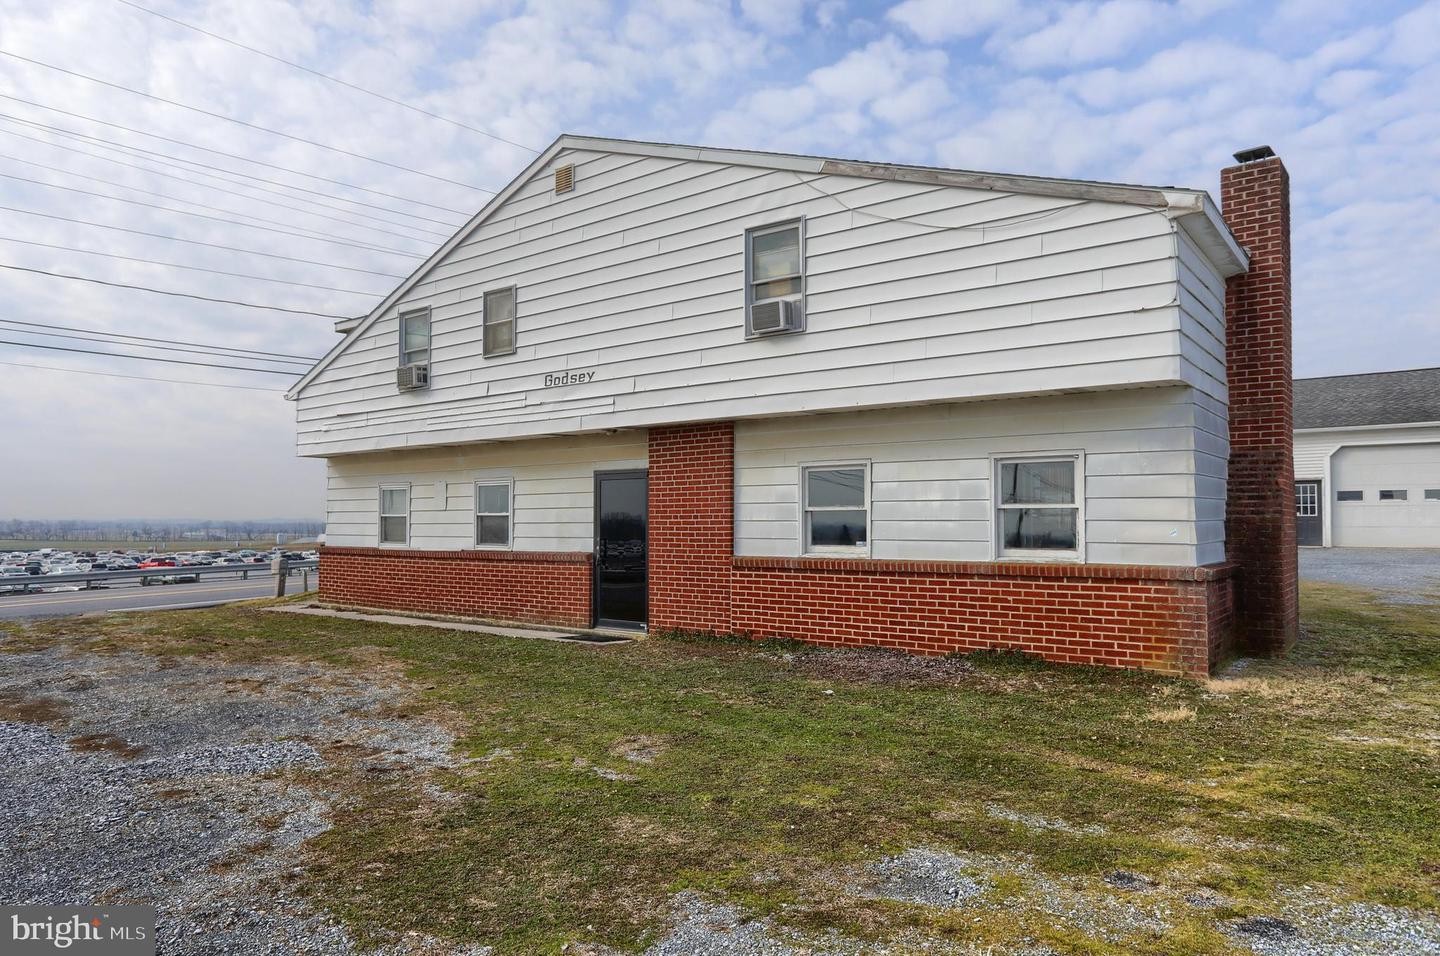 2. 116 Auction Rd